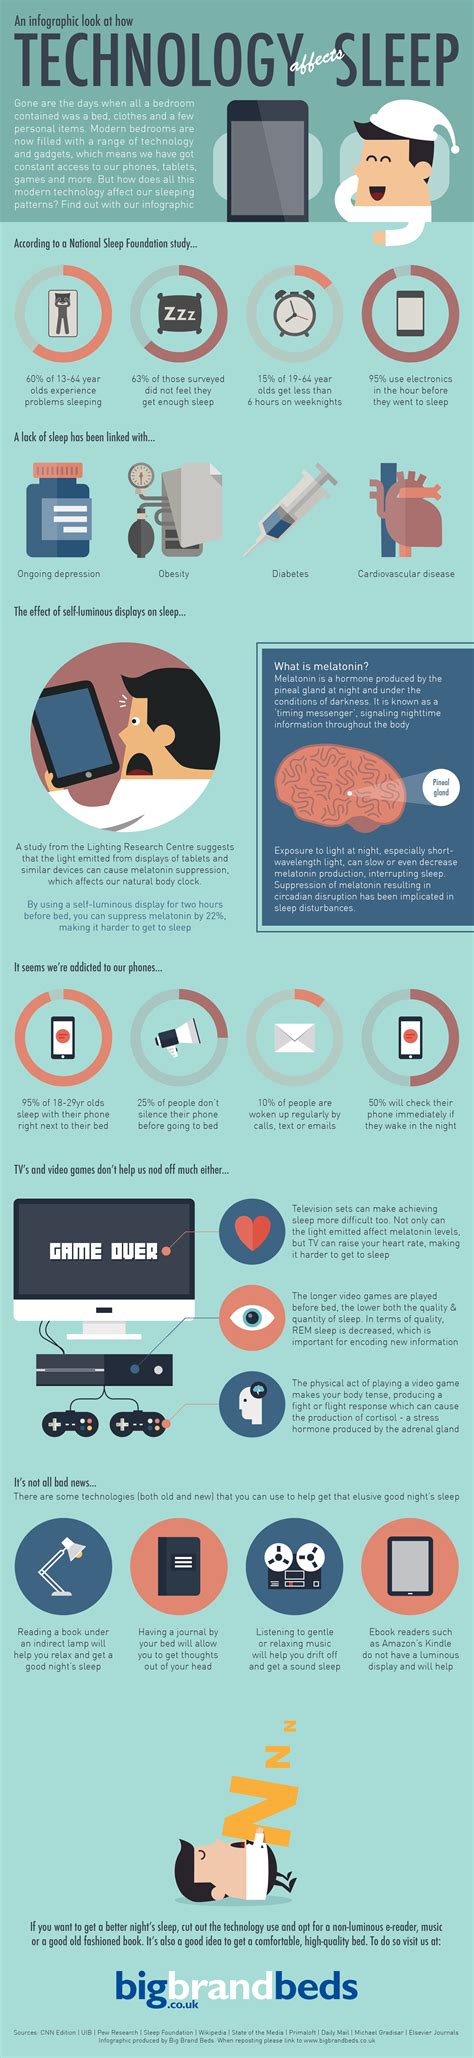 How Technology Affects Sleep #infographic - Visualistan